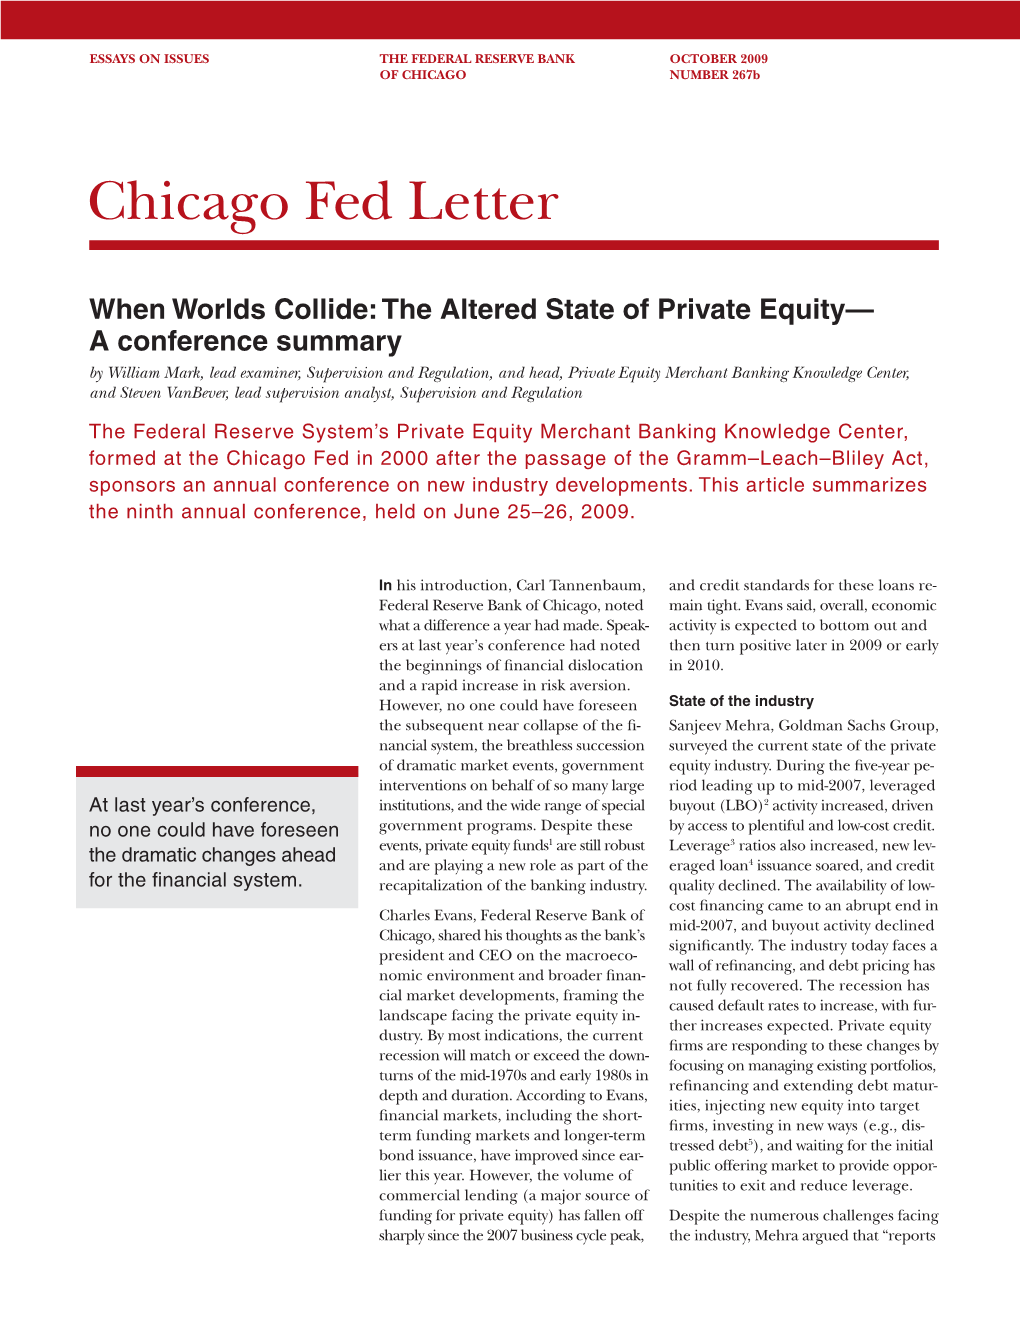 The Altered State of Private Equity—A Conference Summary